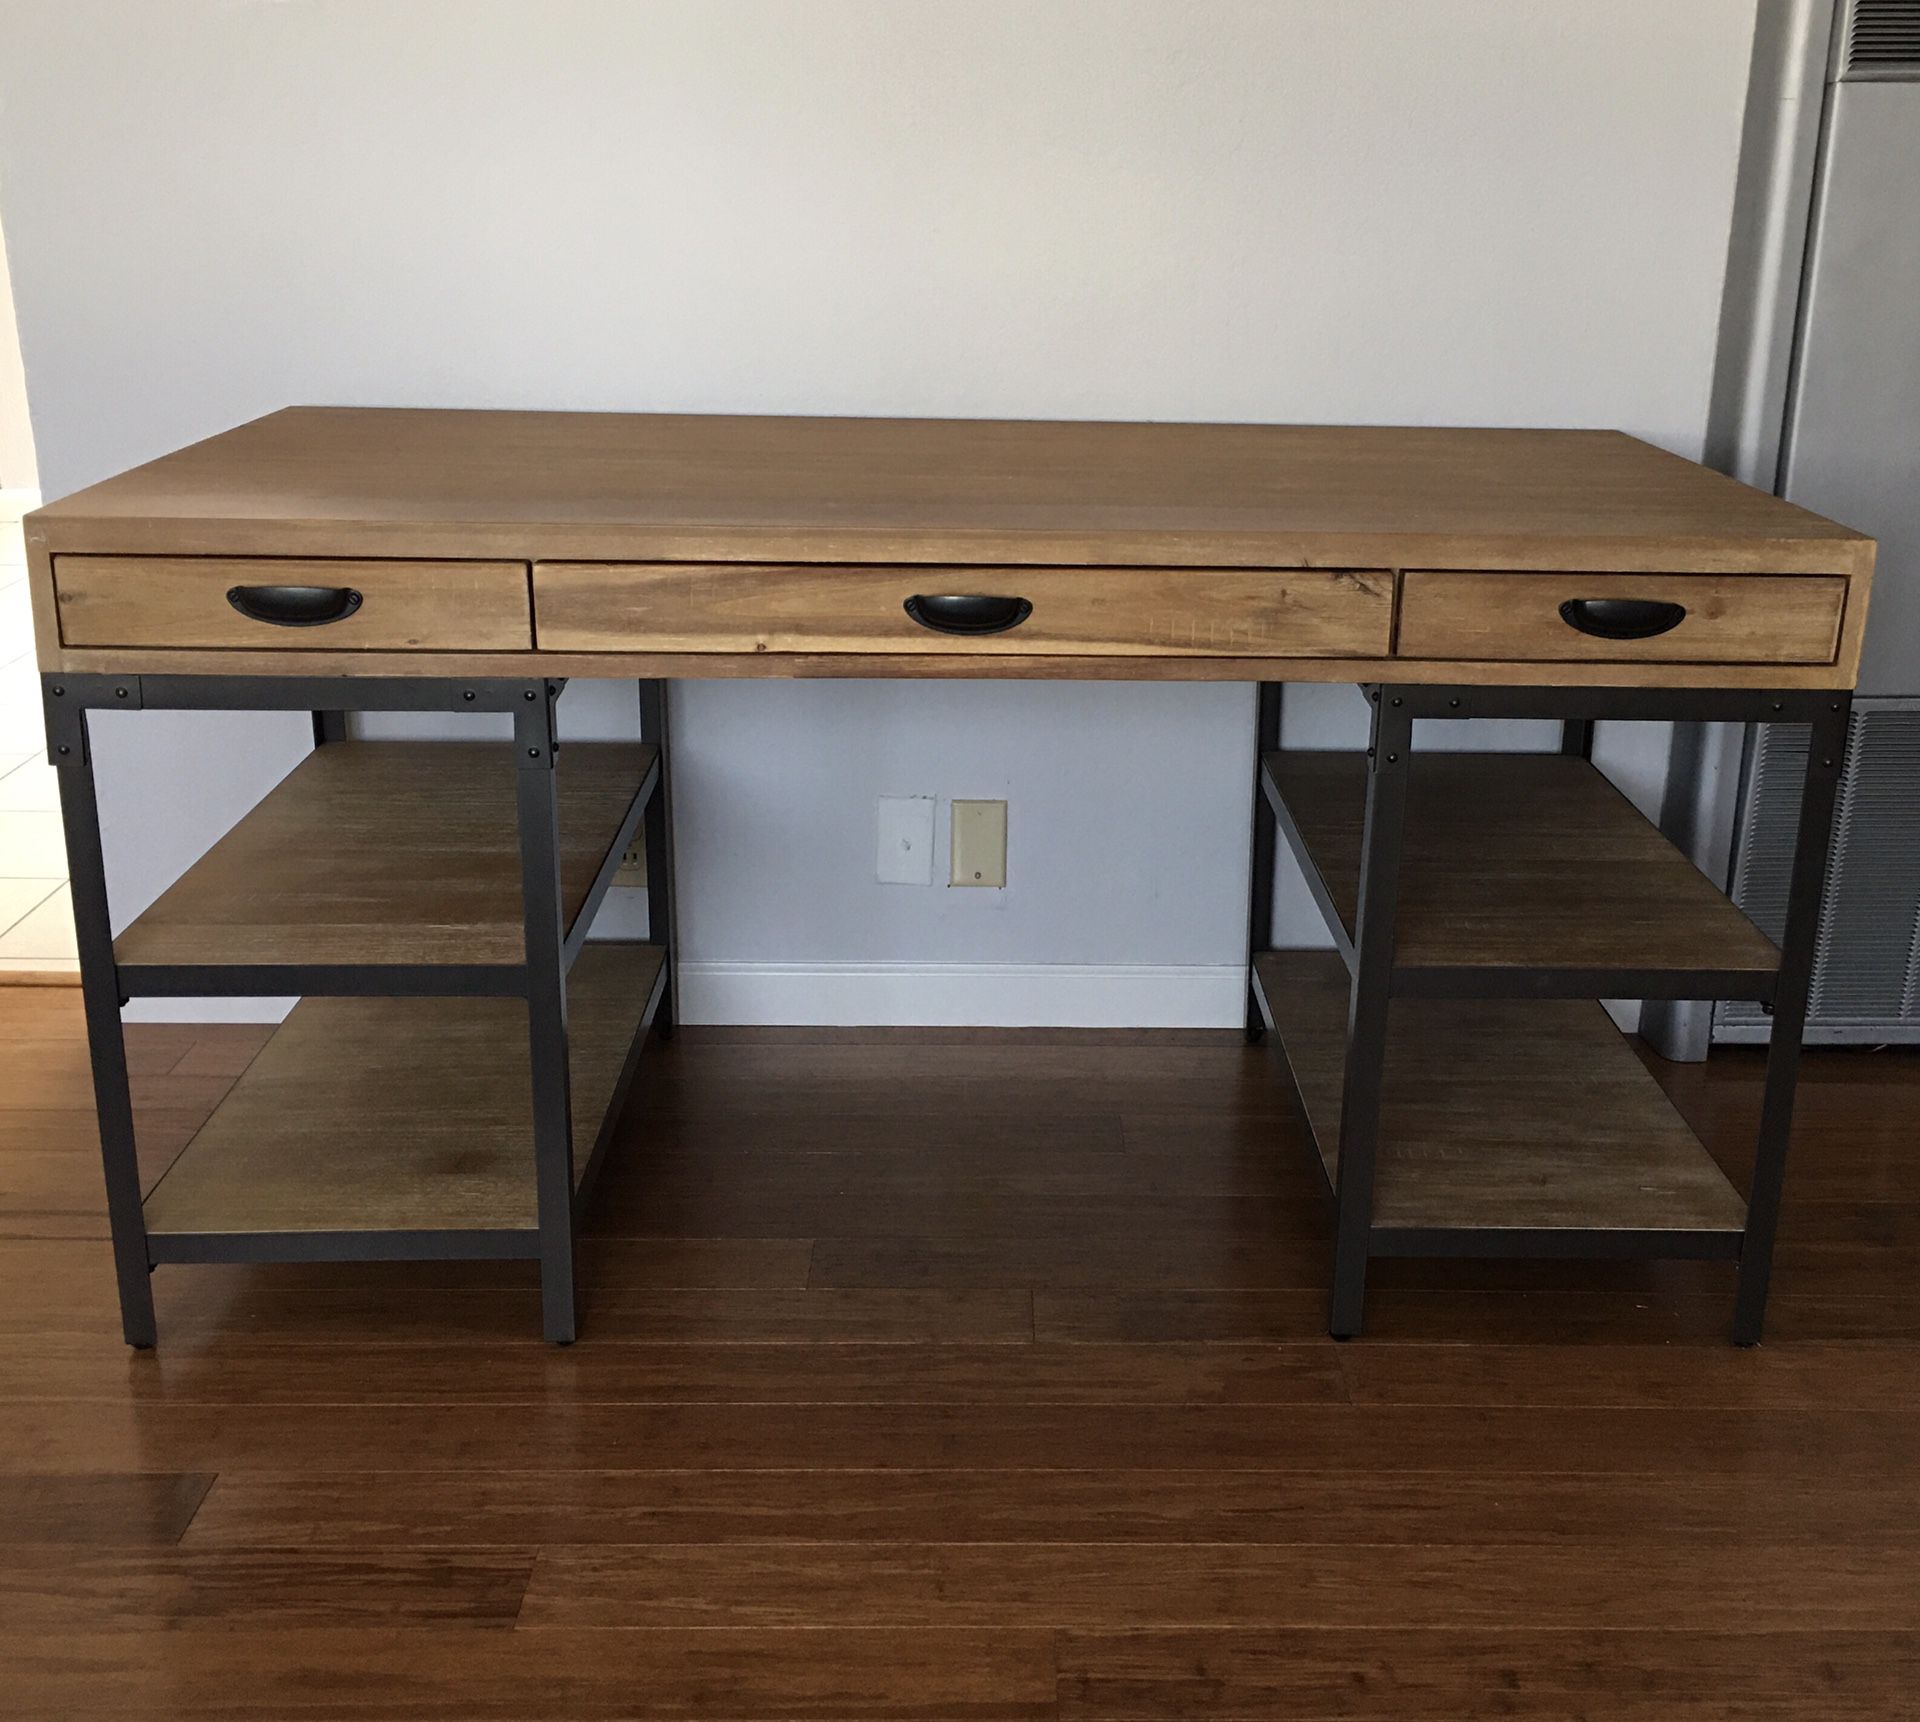 World Market Wood And Metal Teagan Desk With Shelves *LIKE NEW*